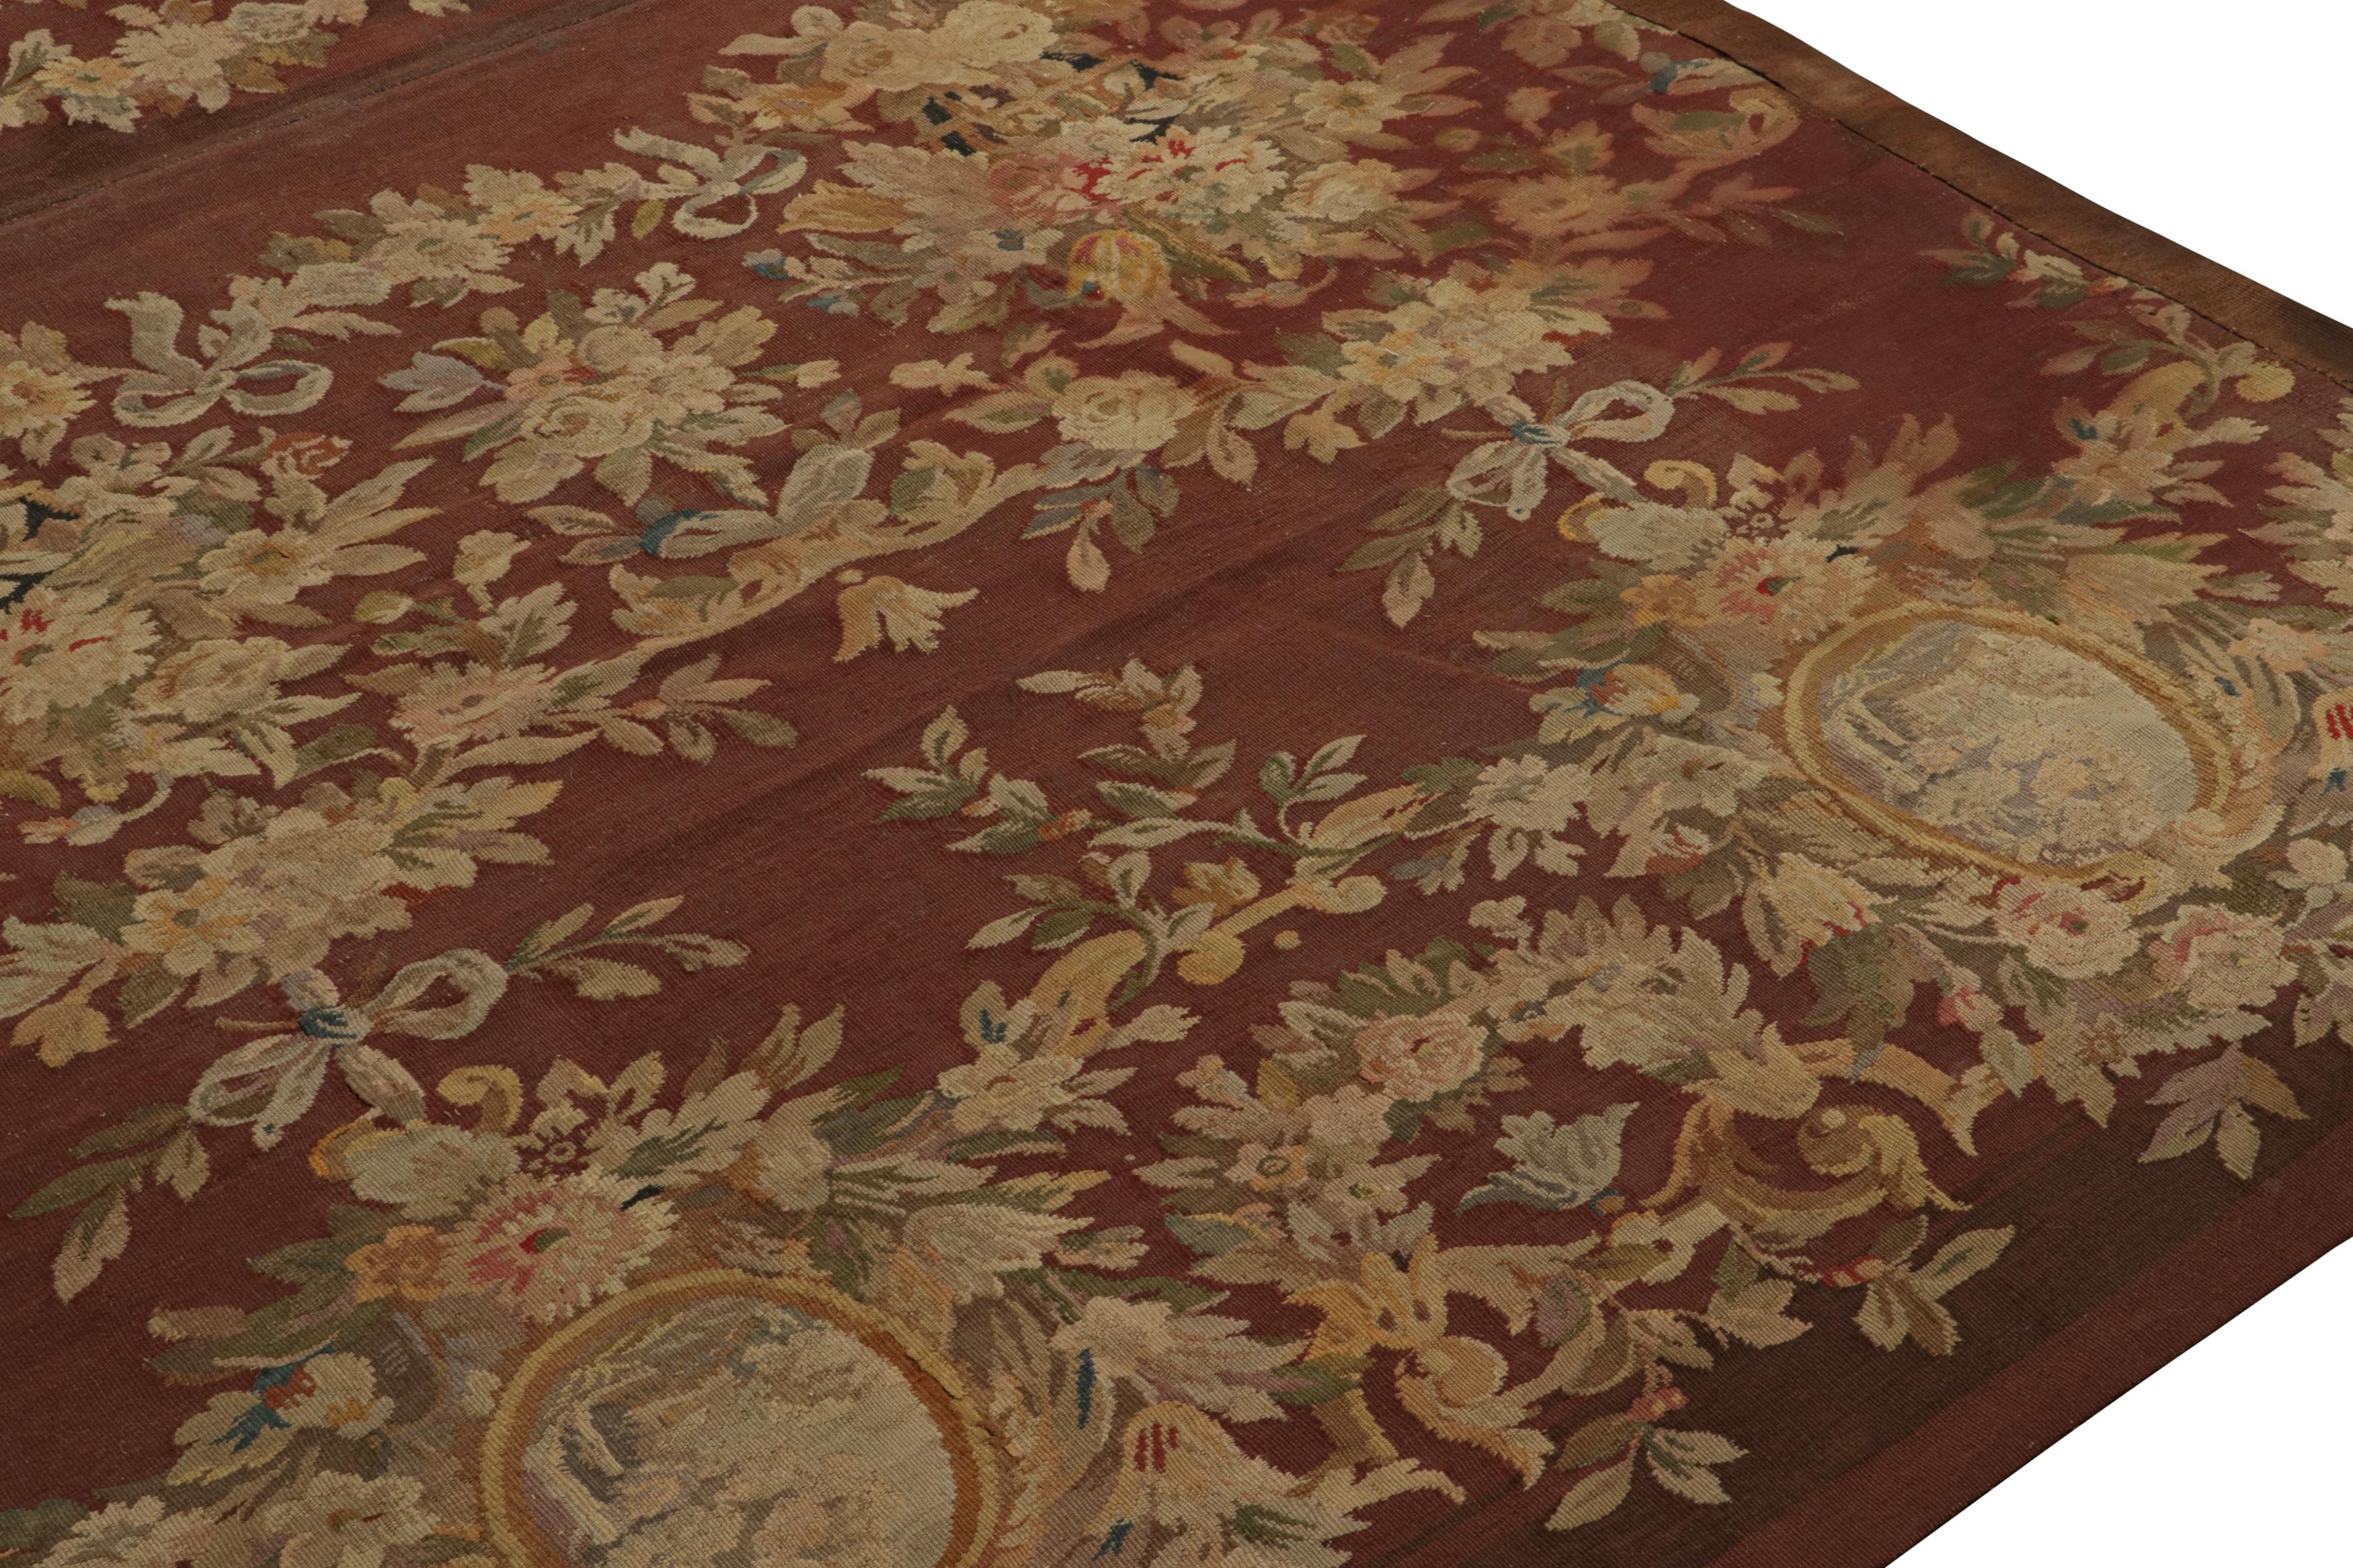 Vintage Aubusson Flatweave Rug in Brown with Floral Patterns, from Rug & Kilim In Good Condition For Sale In Long Island City, NY